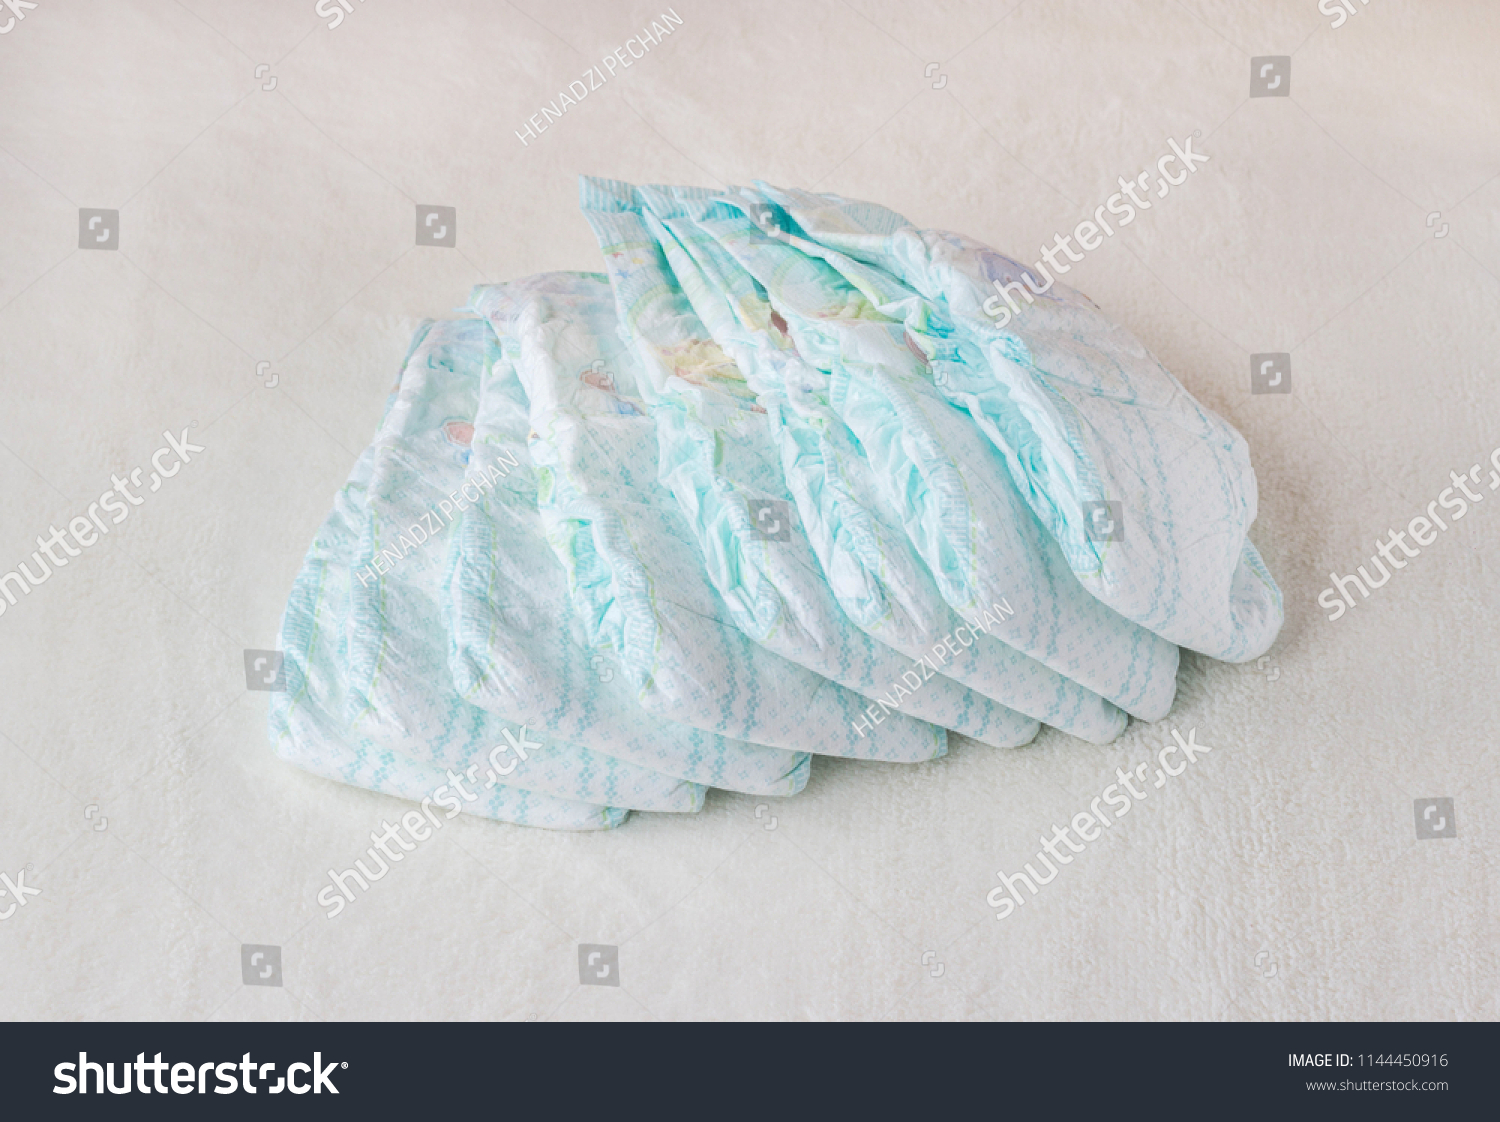 Baby diapers on a white background, diapers for babies #1144450916